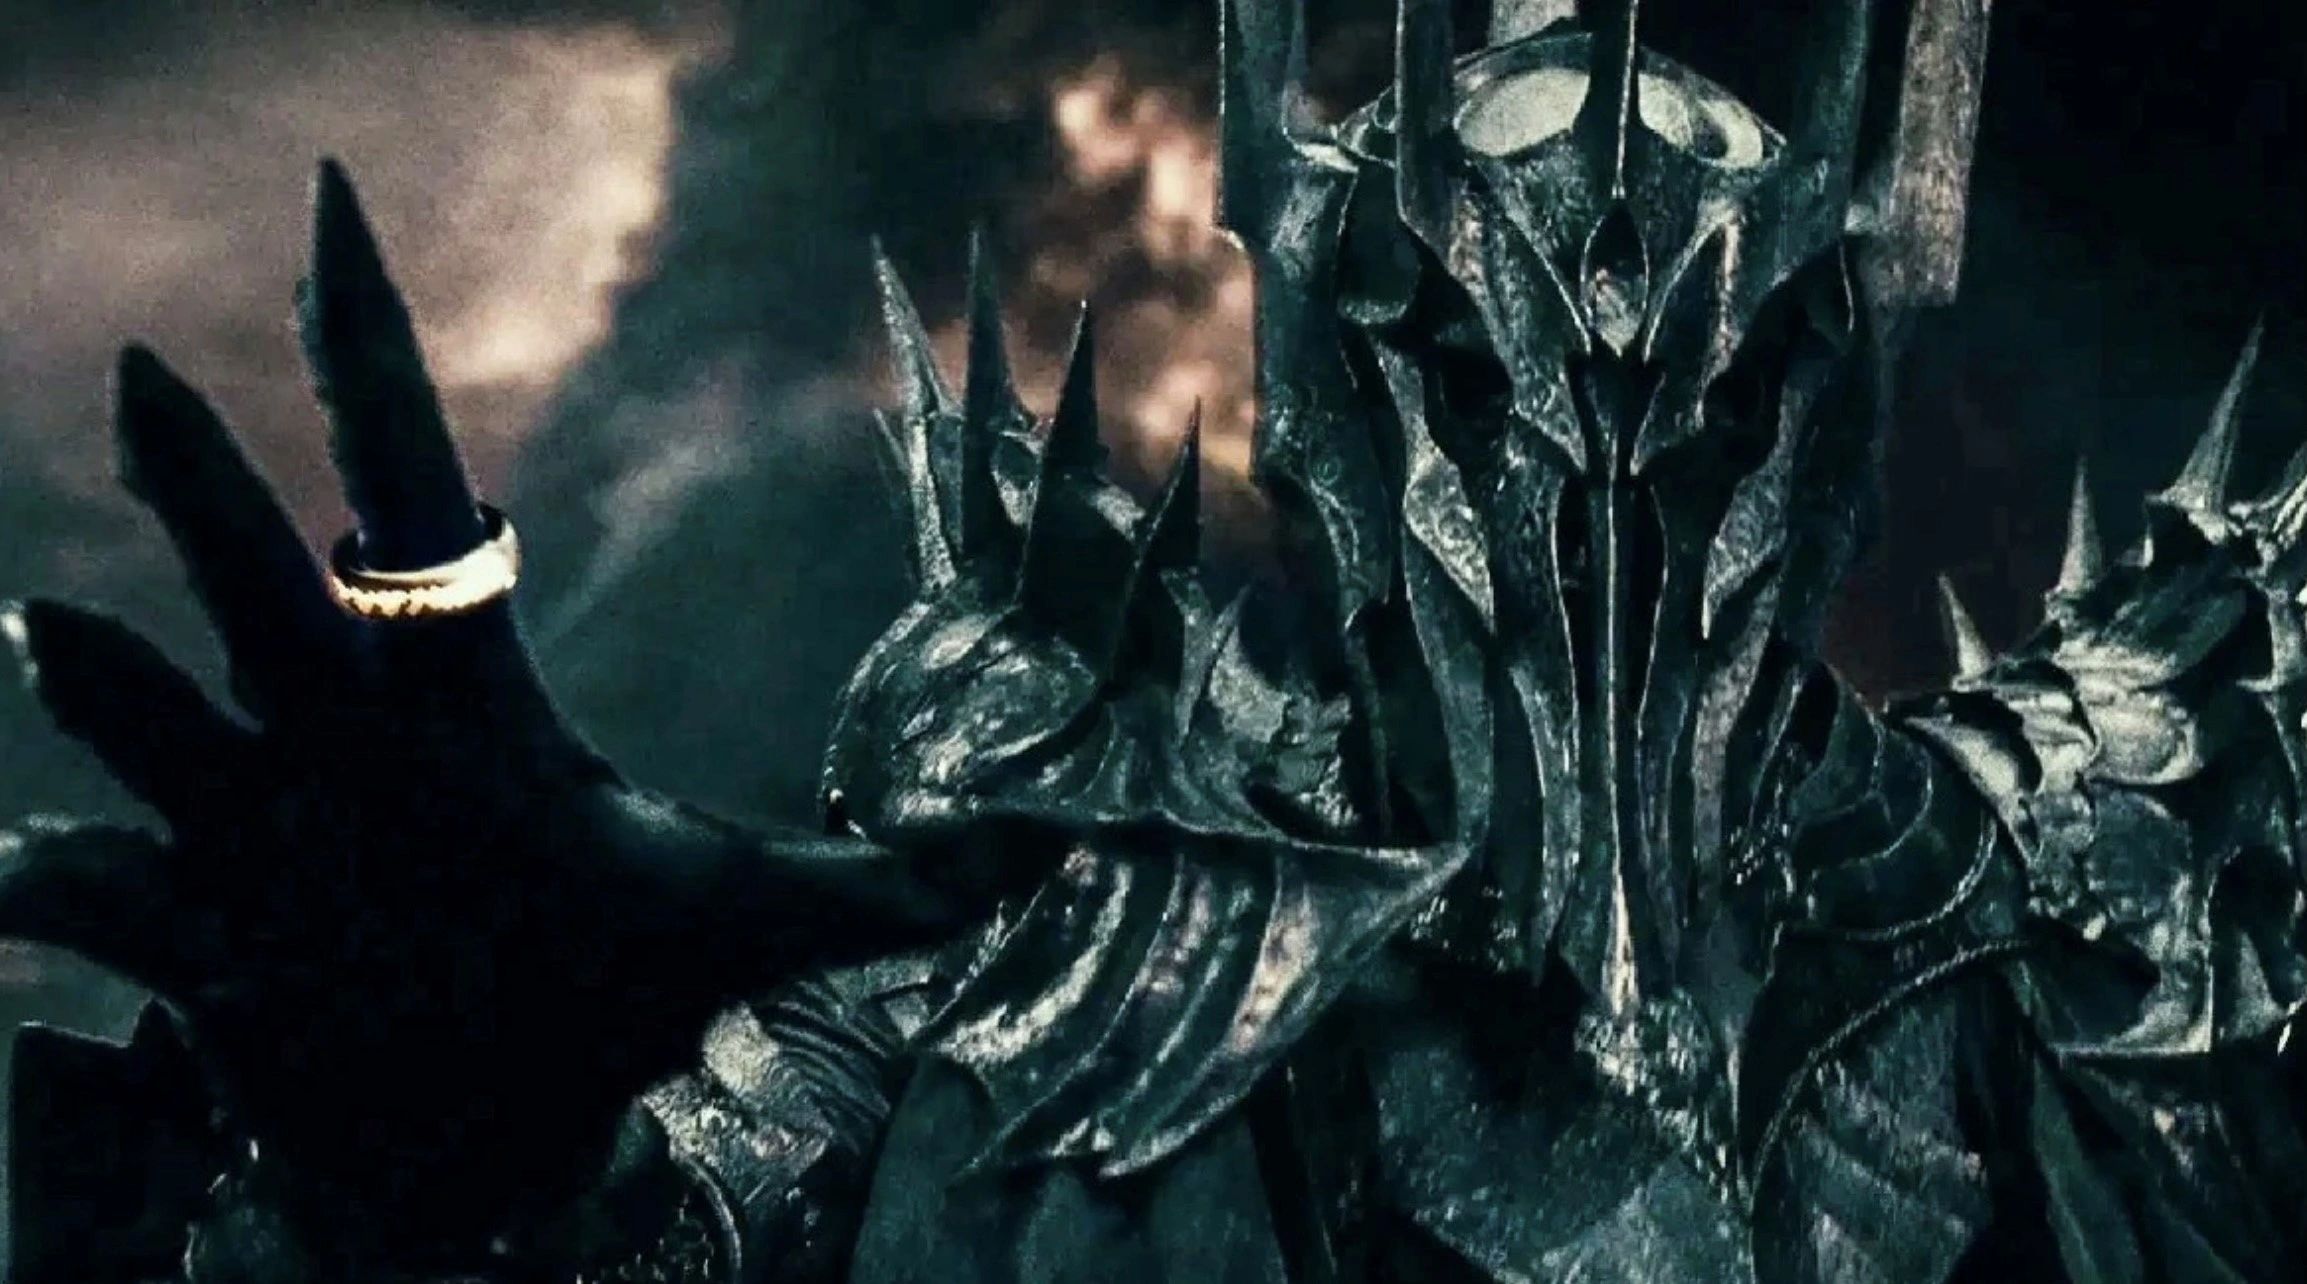 LOTR: The Rings of Power: Sauron identity a 'game' for cast